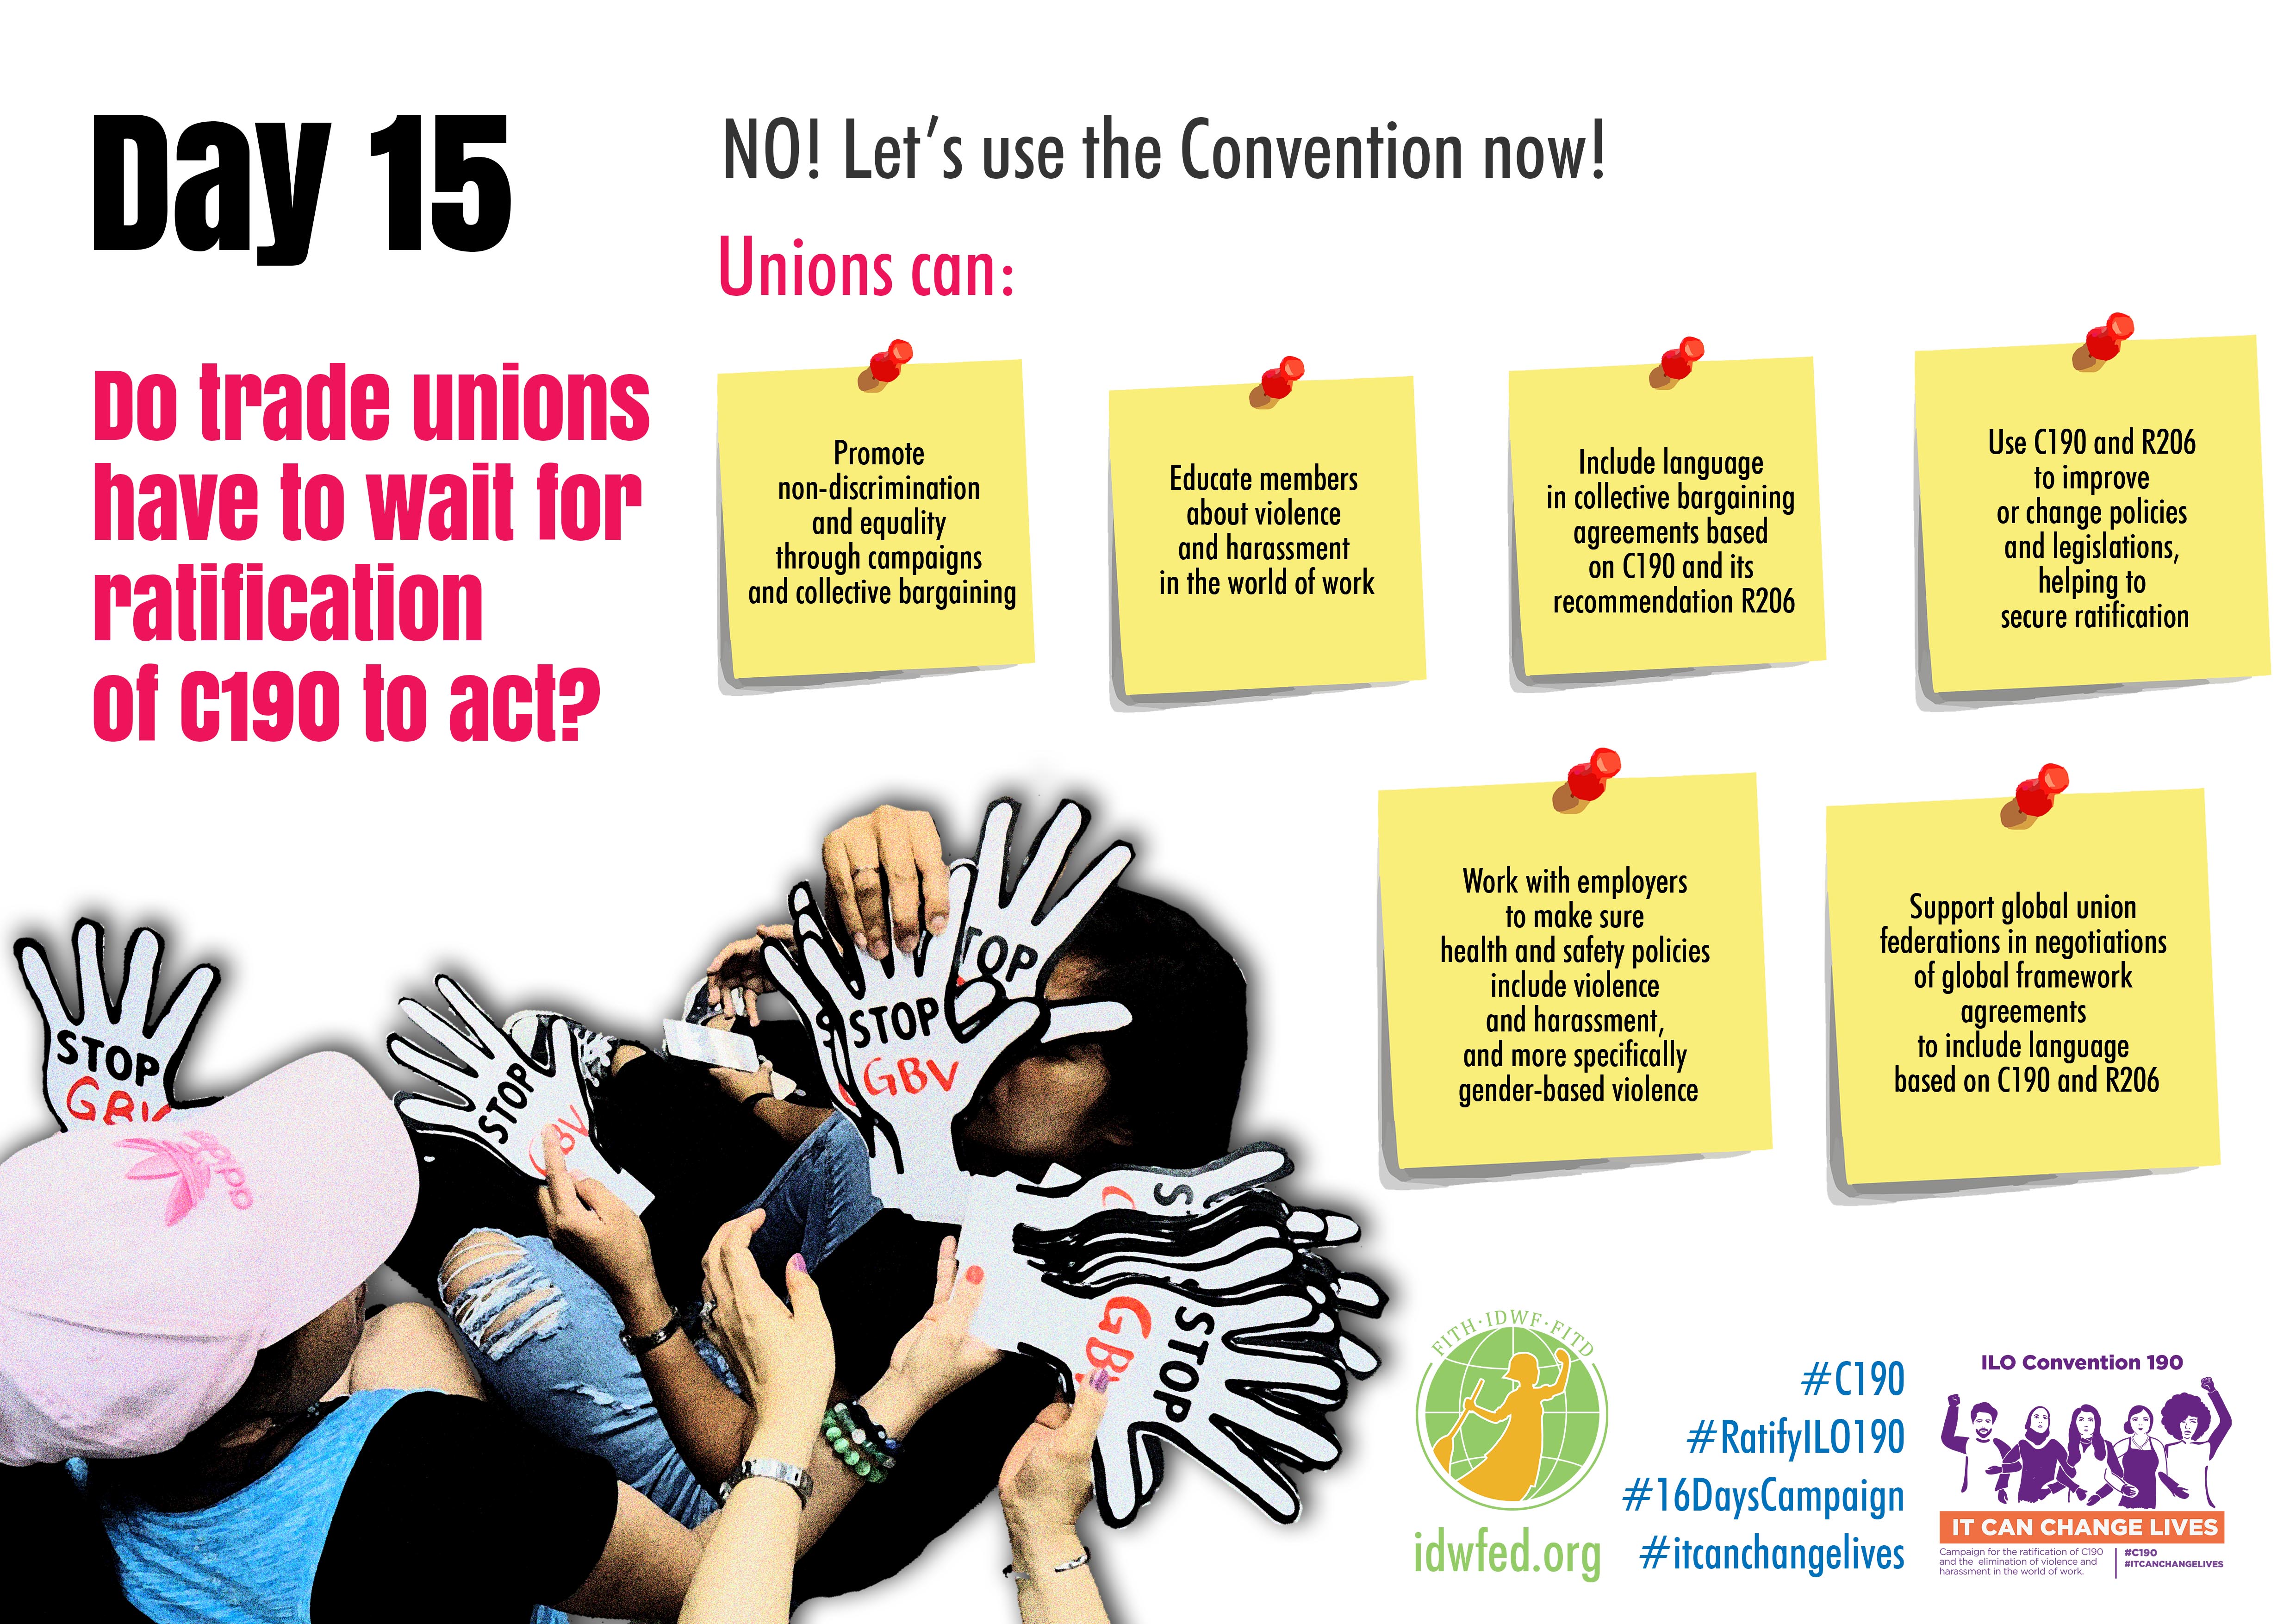 15. Do trade unions have to wait for ratification of C190 to act?